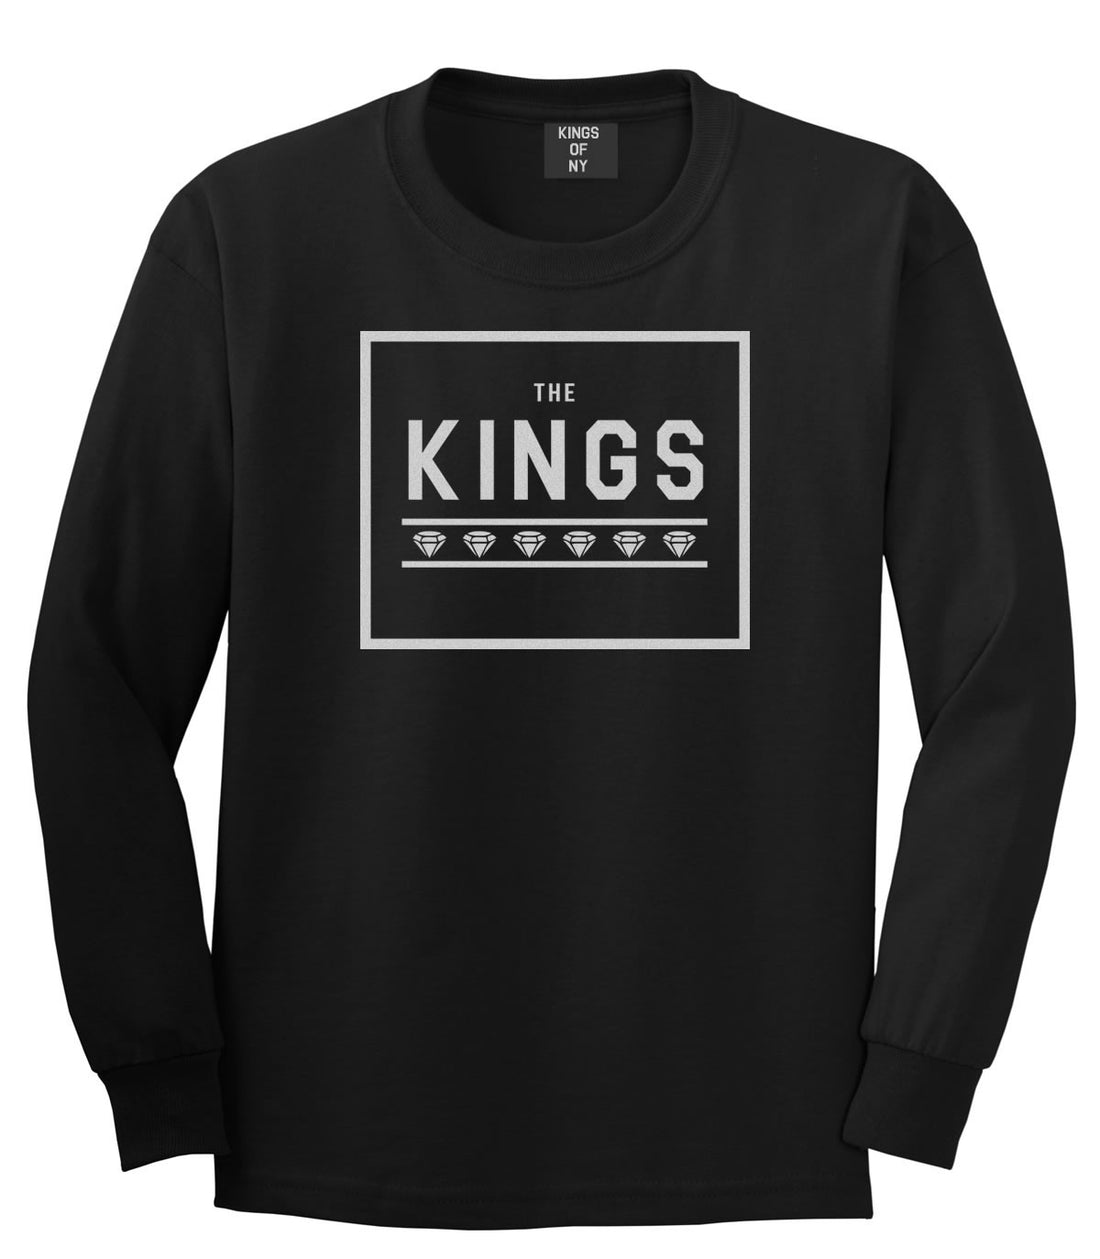 The Kings Diamonds Long Sleeve T-Shirt in Black by Kings Of NY